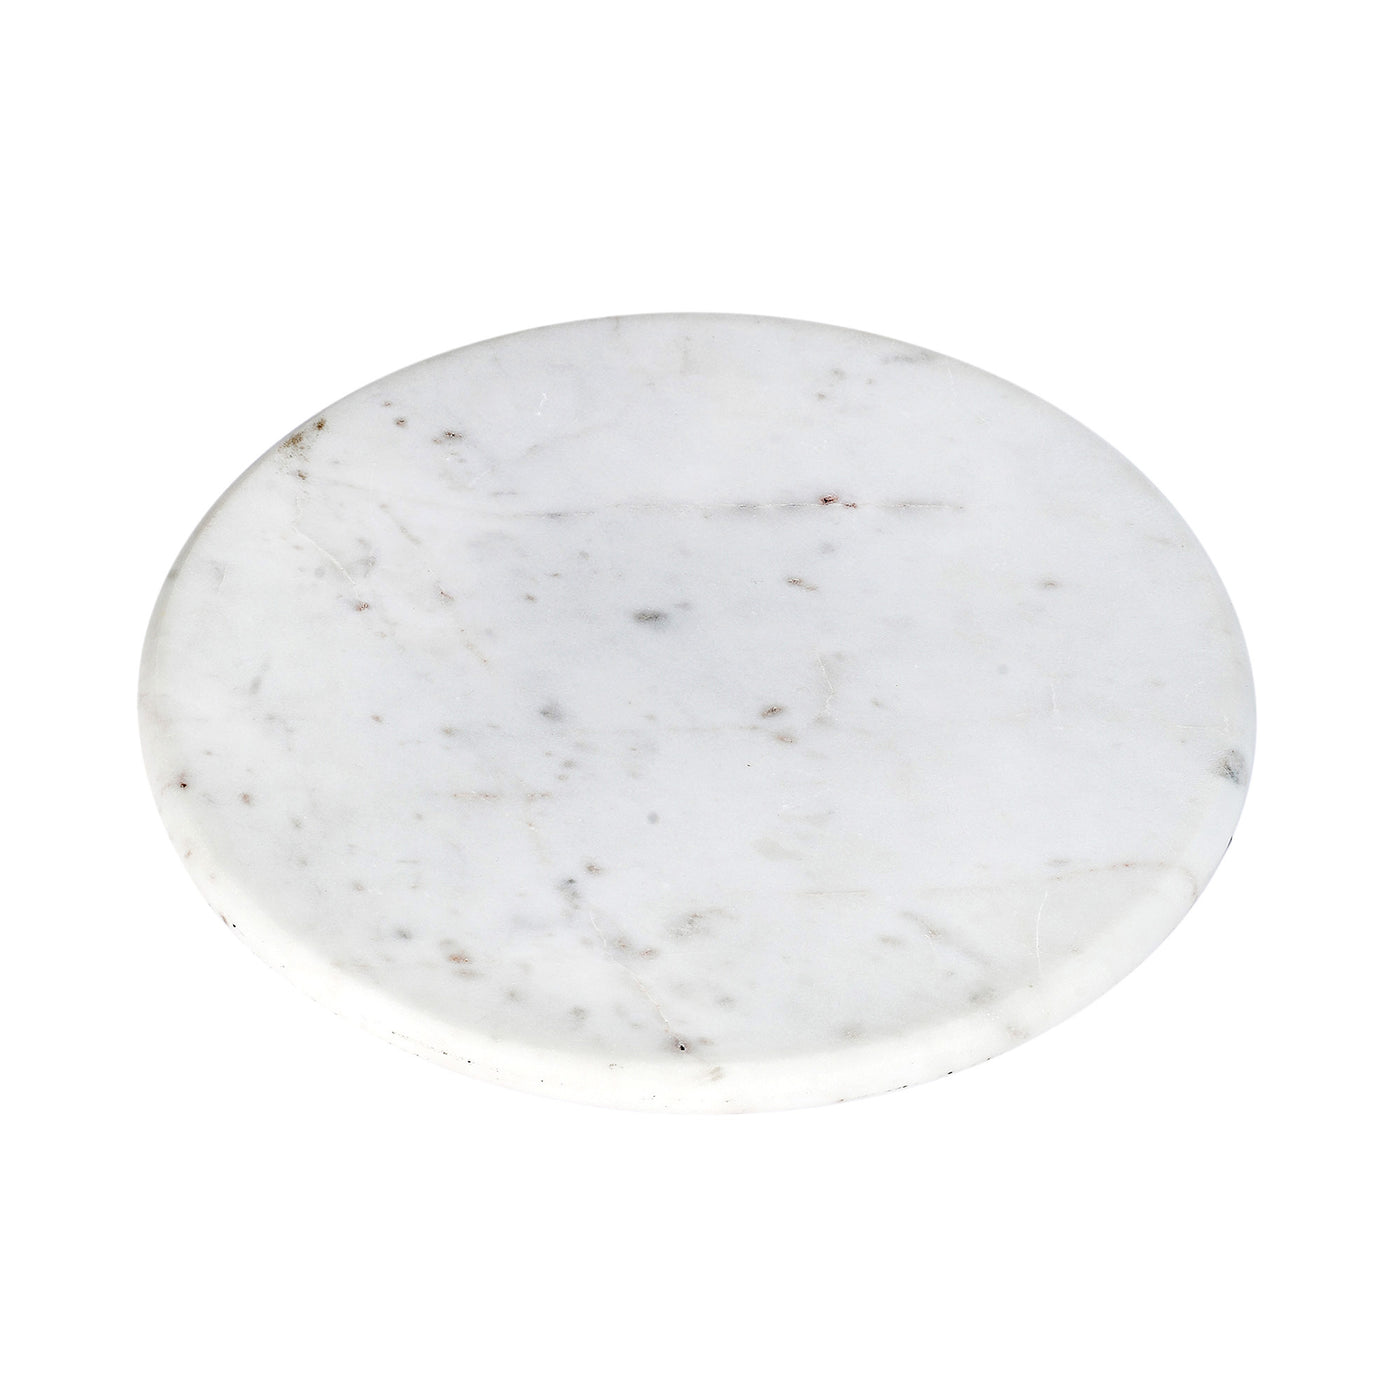 Marbluxe Circular Serving Board with Glass Cover